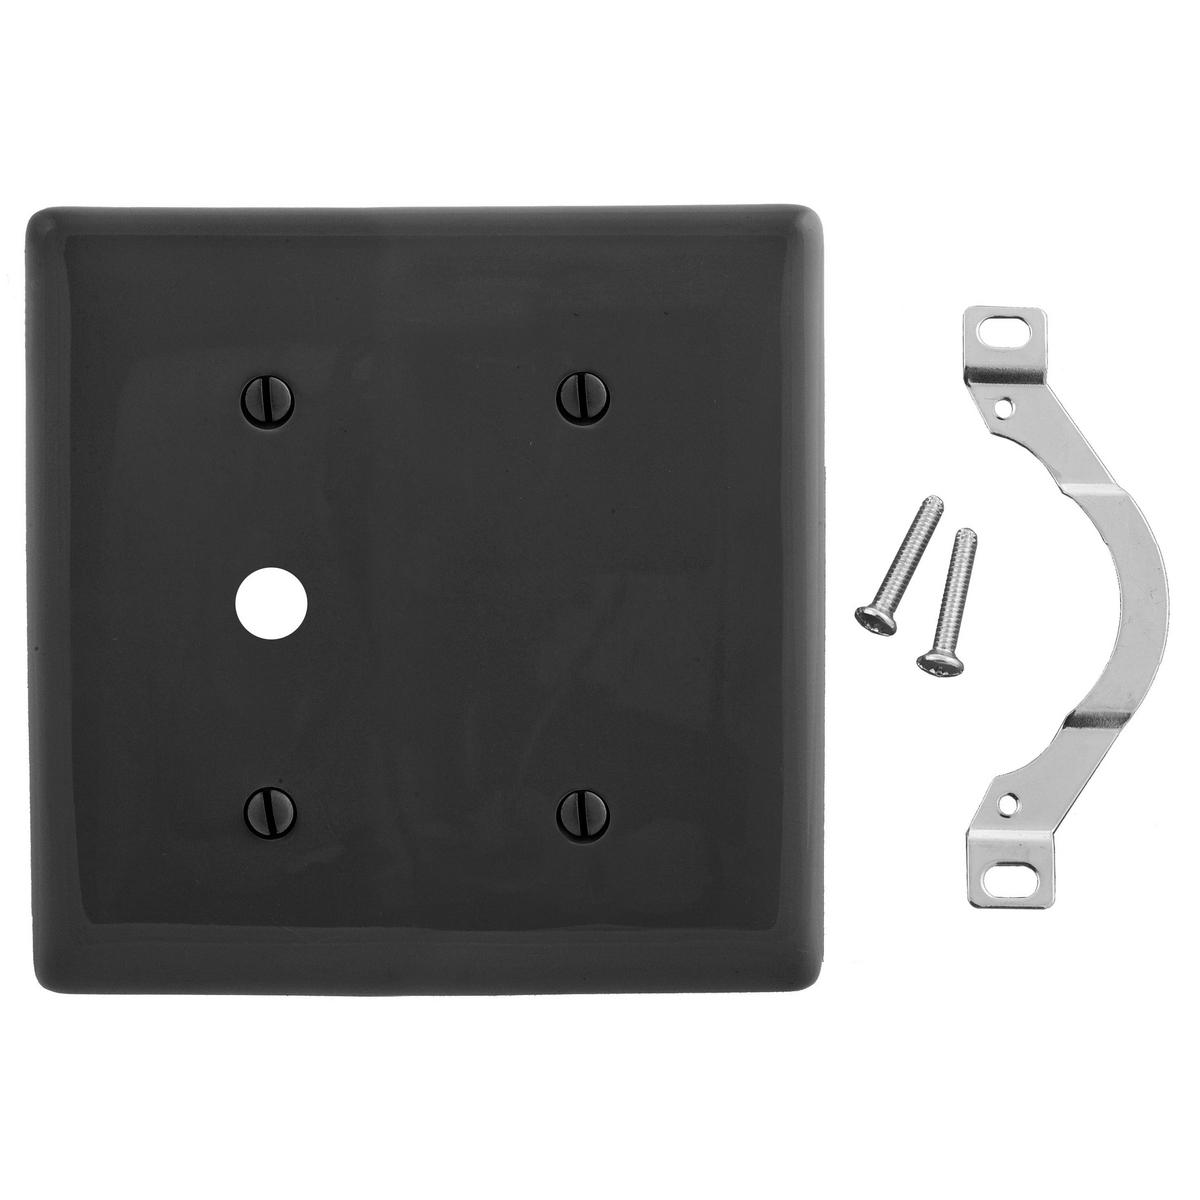 Hubbell NP1214BK Wallplates, Nylon, 2-Gang, 1) Blank, 1) .406" Opening, Black  ; Reinforcement ribs for extra strength ; High-impact, self-extinguishing nylon material ; Captive screw feature holds mounting screw in place ; Standard Size is 1/8" larger to give you extra c